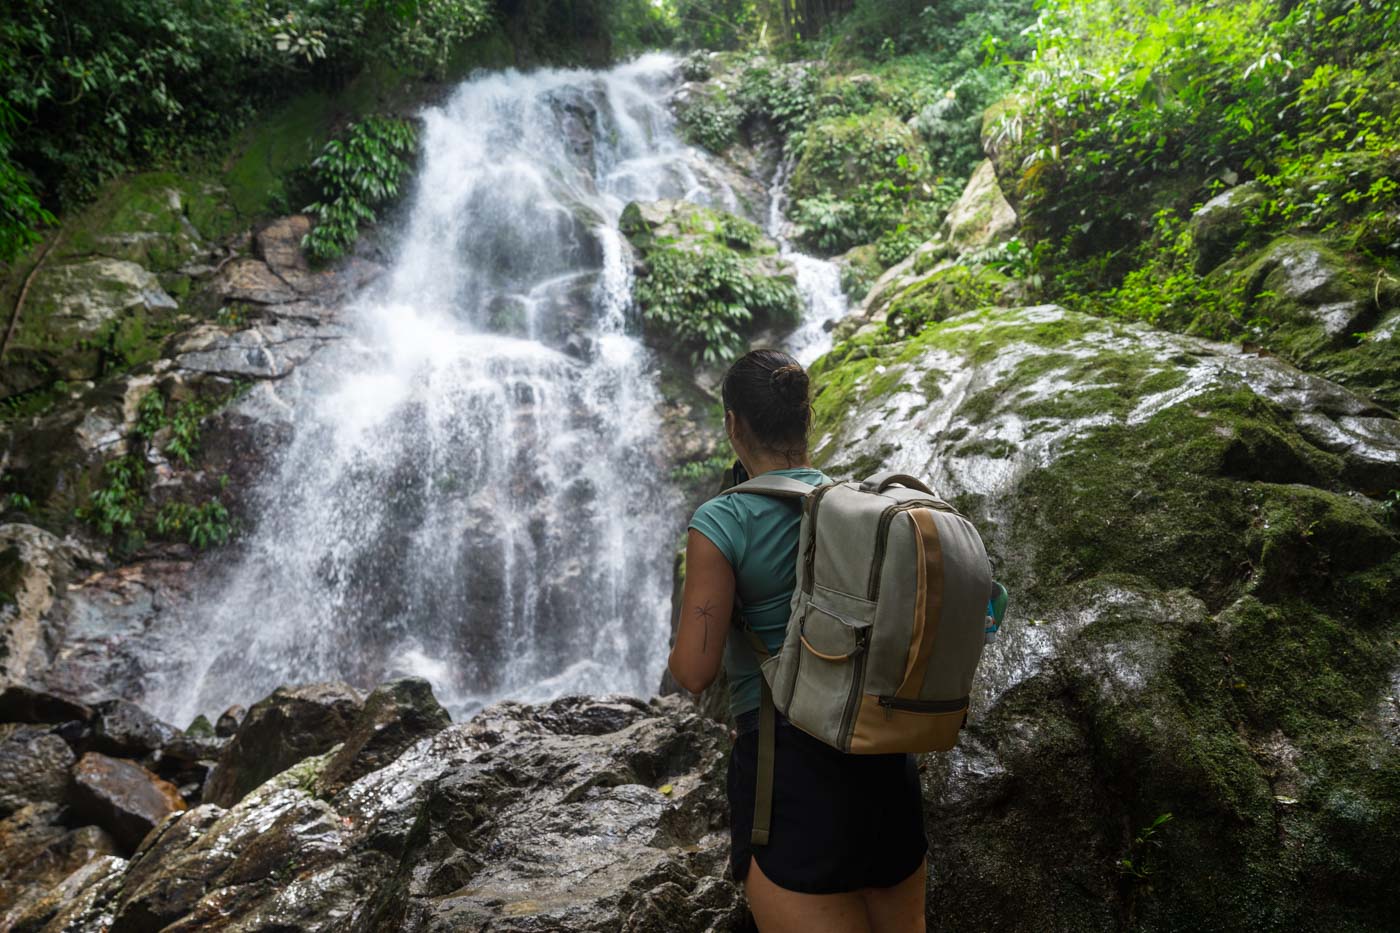 Sara in hiking gear and a backpack admiring the view of the upper Marinka Waterfall in the forest.